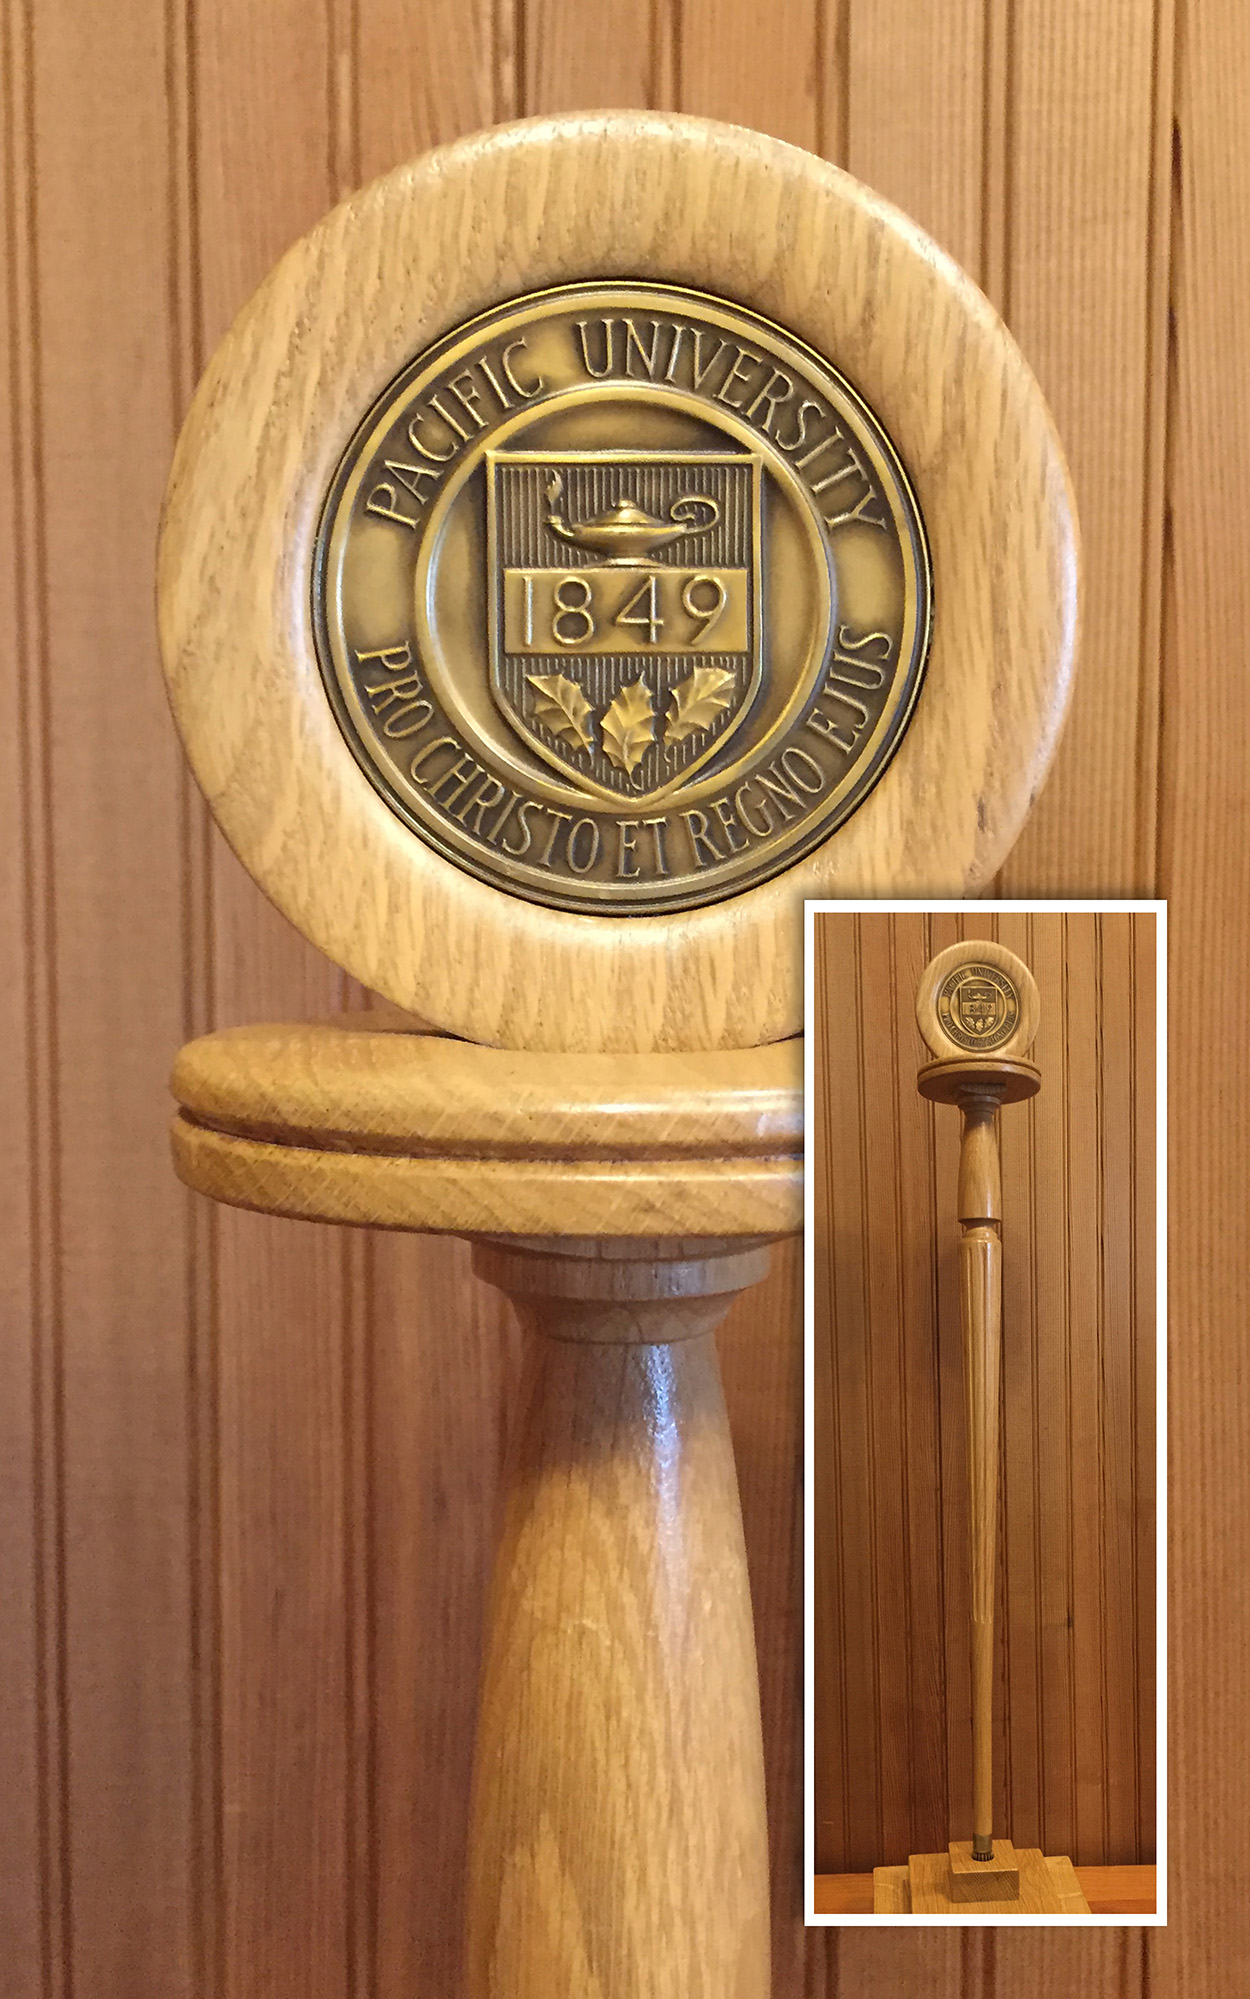 Wooden staff with a brass university seal topper